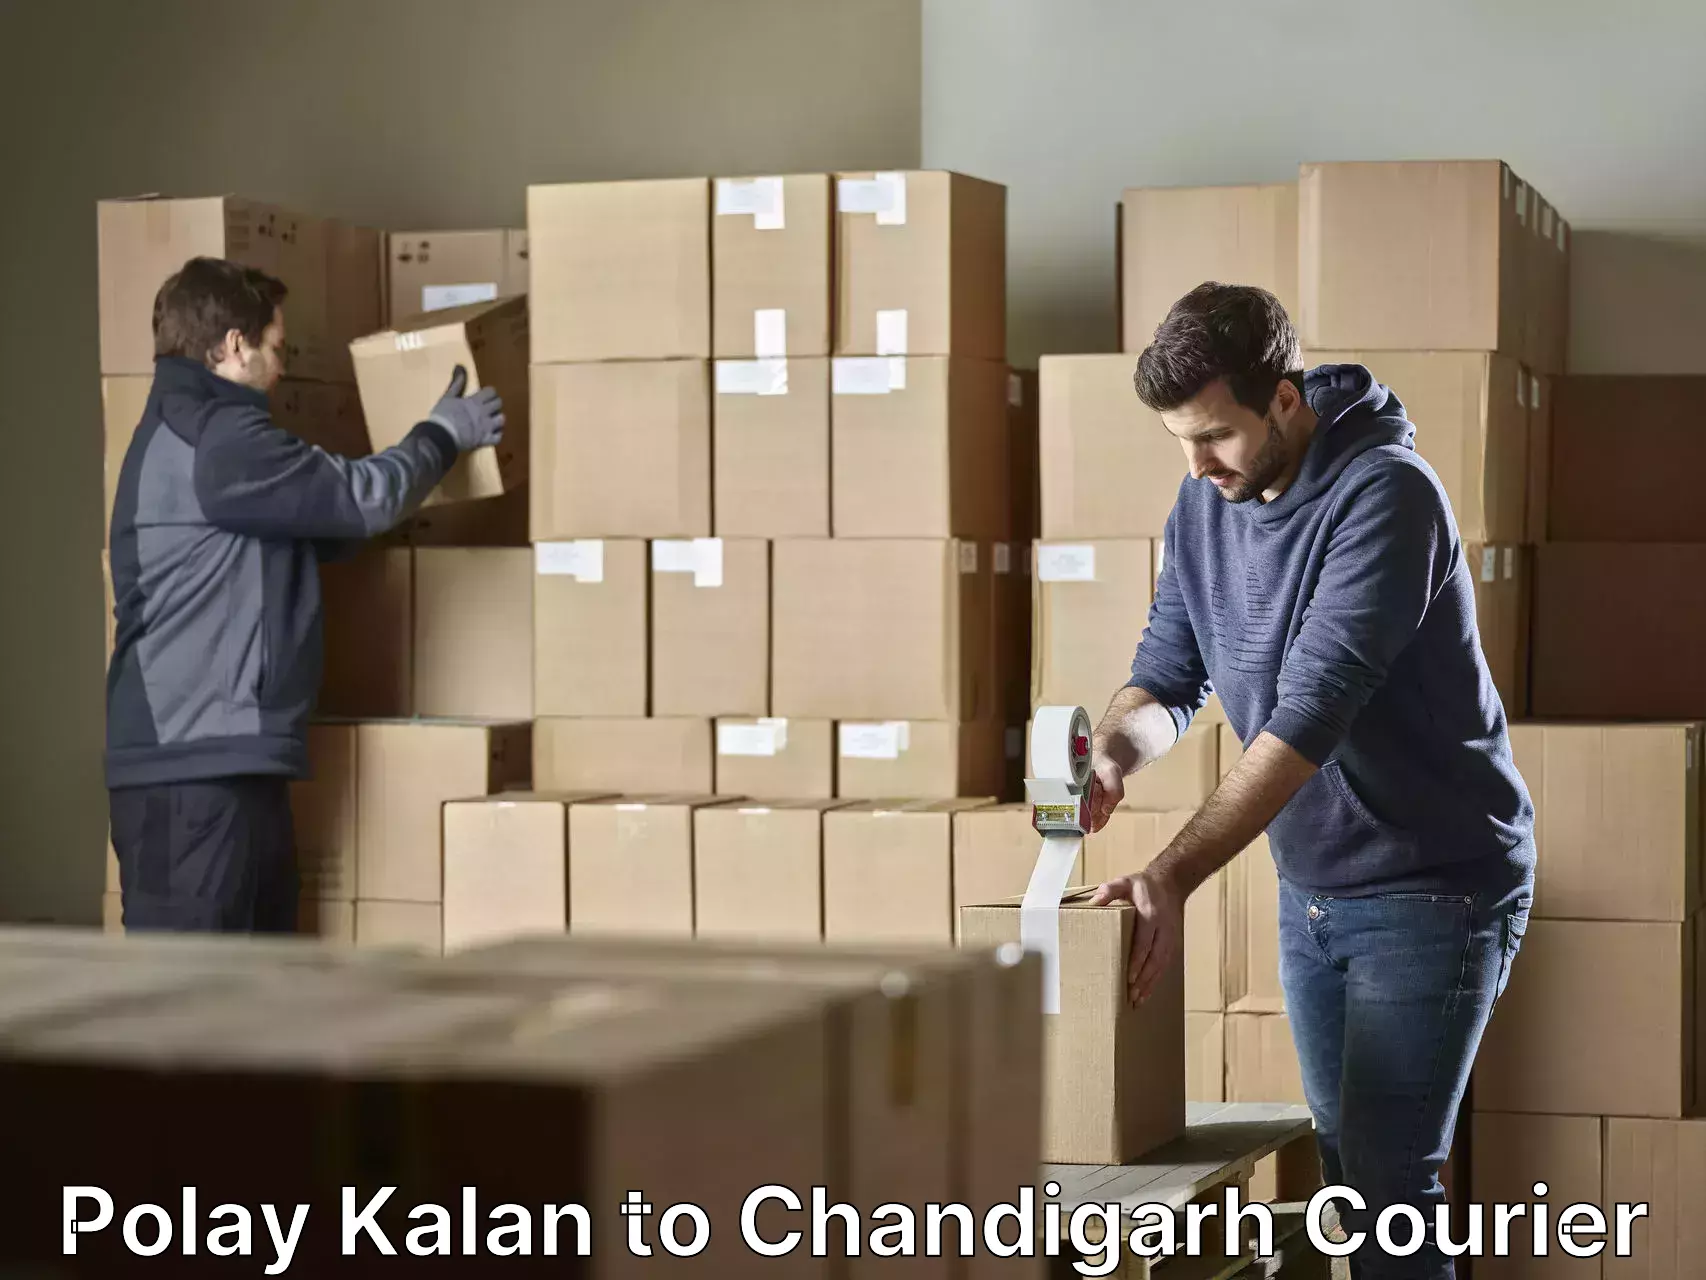 Moving and handling services Polay Kalan to Chandigarh